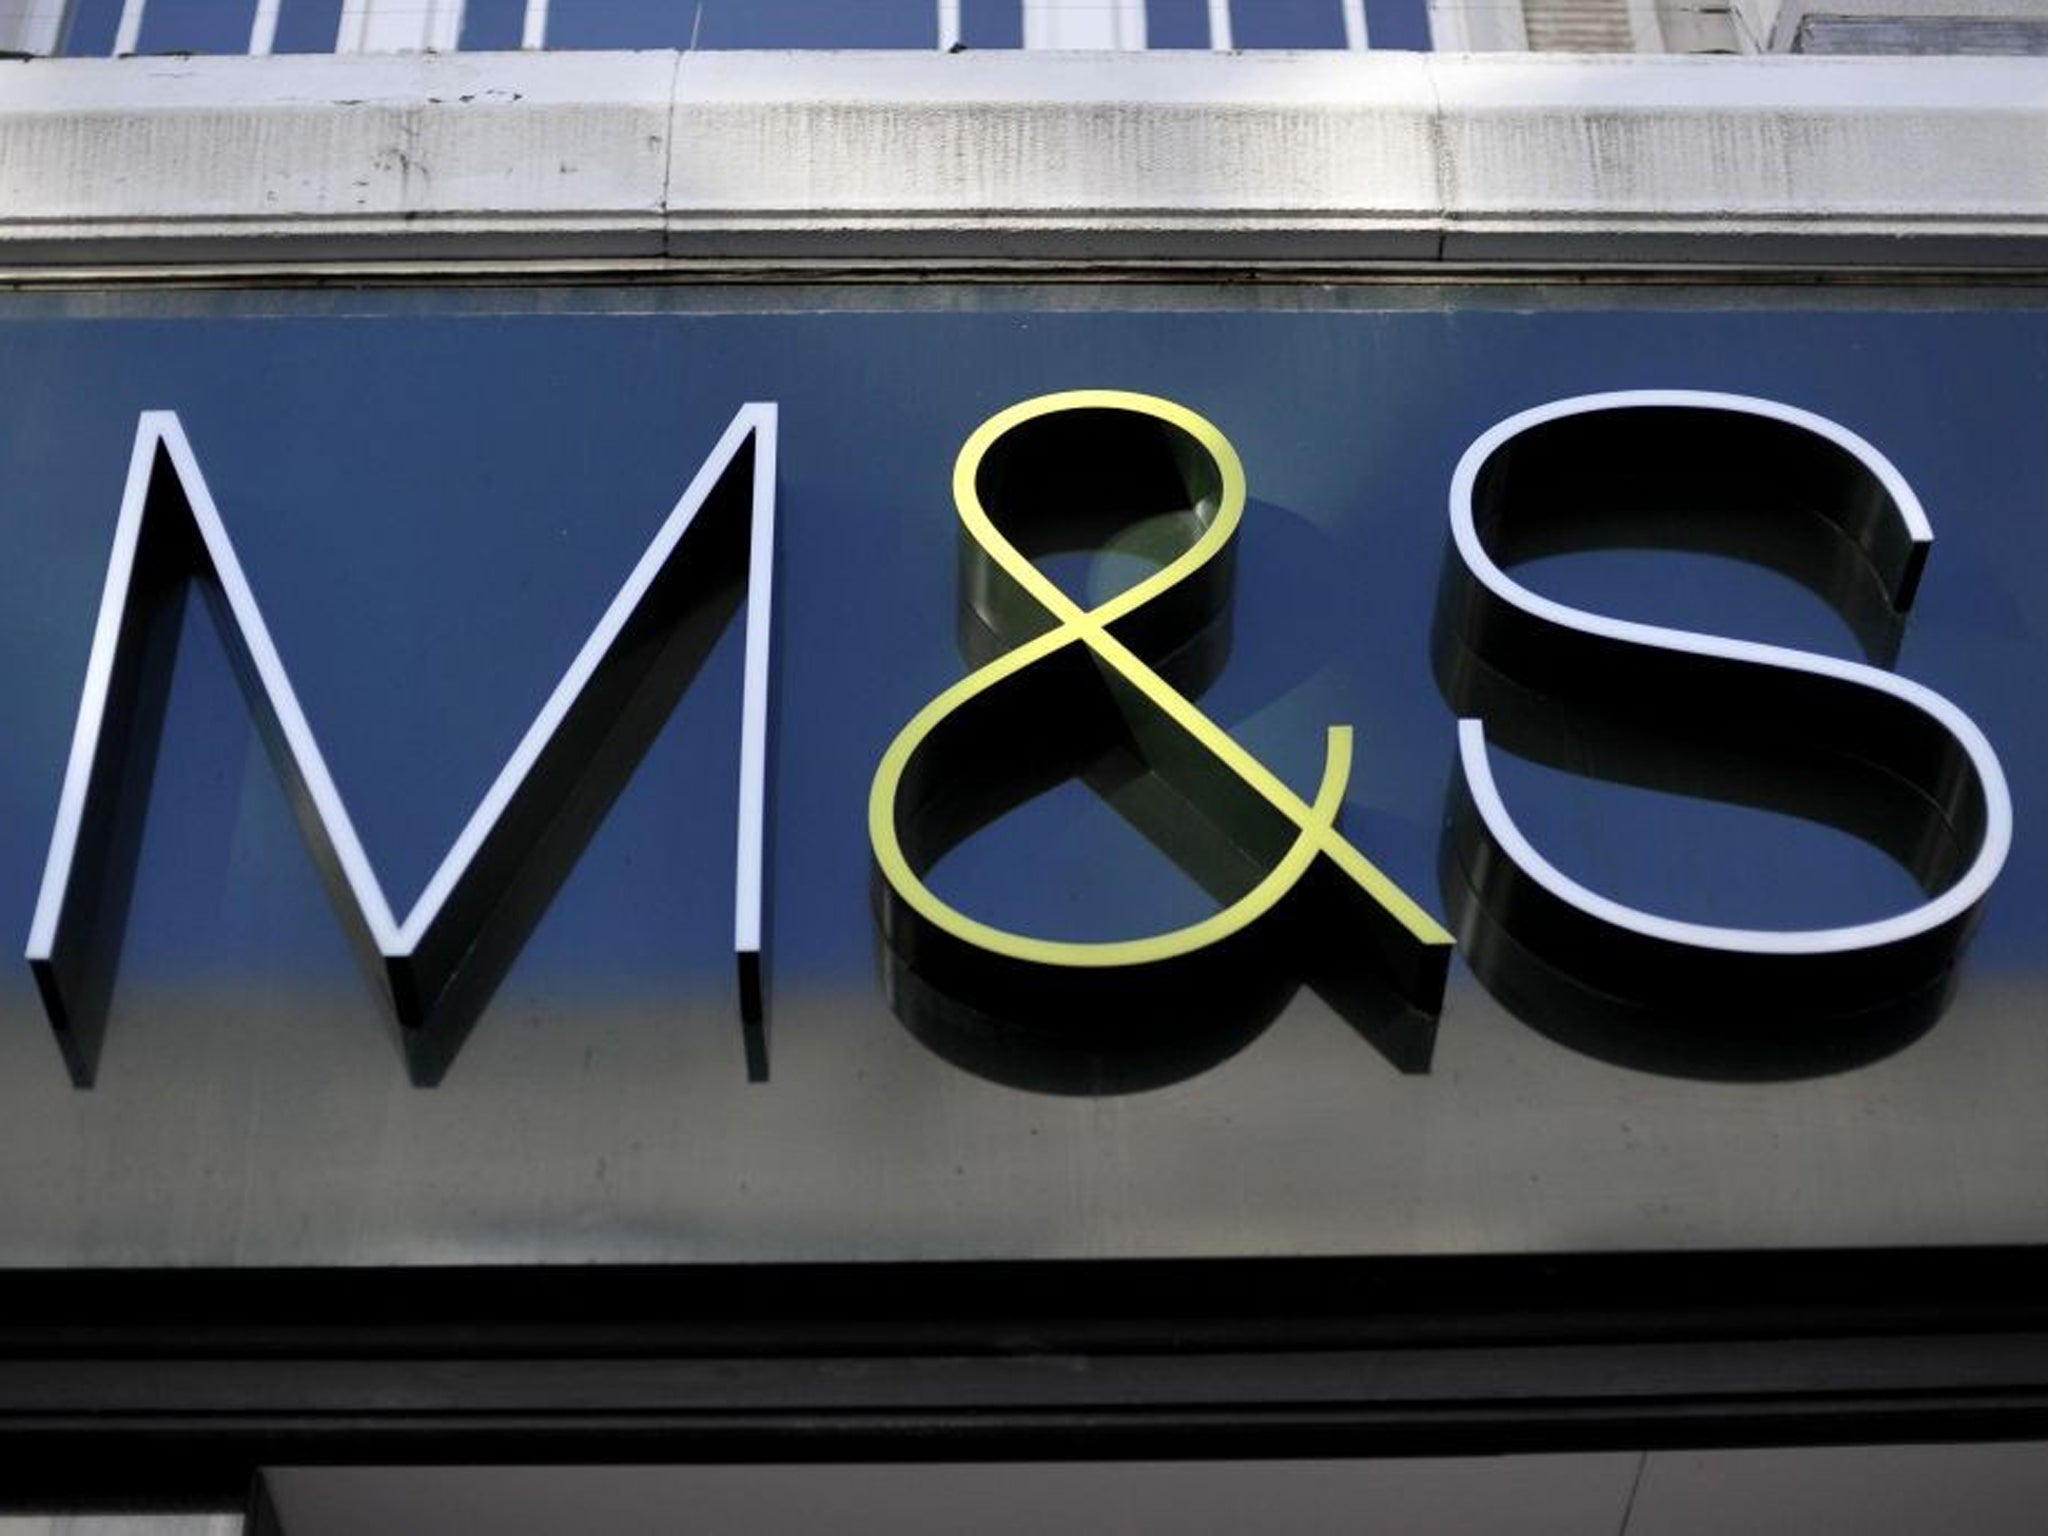 Marks & Spencer said it wanted to create a working environment 'free from discrimination', and would accommodate Muslim staff who did not want to handle pork or alcohol